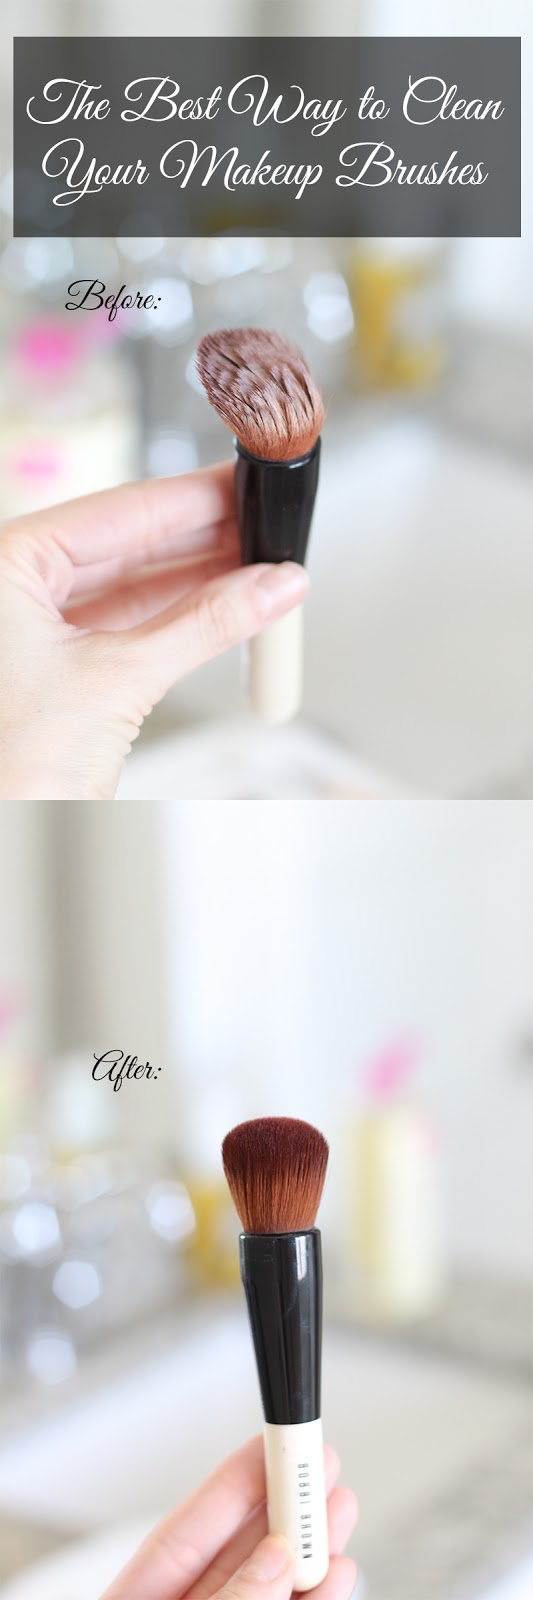 The BEST Way to Clean Makeup Brushes!